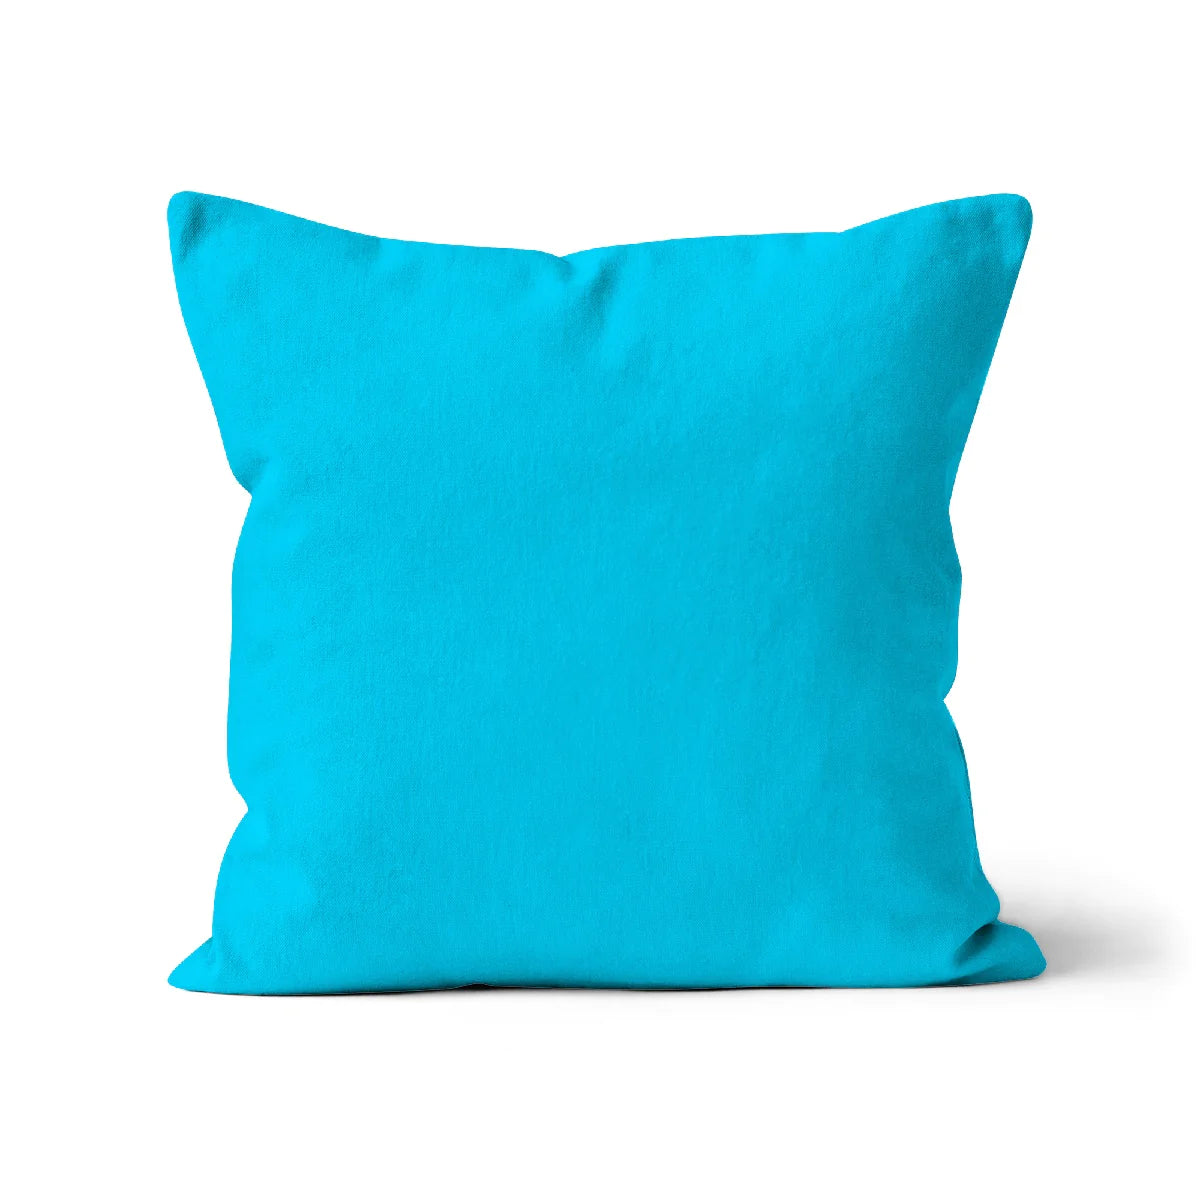 Bright blue cotton cushion cover. Cyan Blue cushion cover. Cyan pillow cover. Organic cotton. Square cushion cover. Unfilled cushion. Organic cotton cushion. Made in the UK. British-Made. Sustainable homeware. Plain cushion covers. Eco-friendly cushion. High-quality cushion covers. Machine washable cushion covers. Plain colour cushion covers.